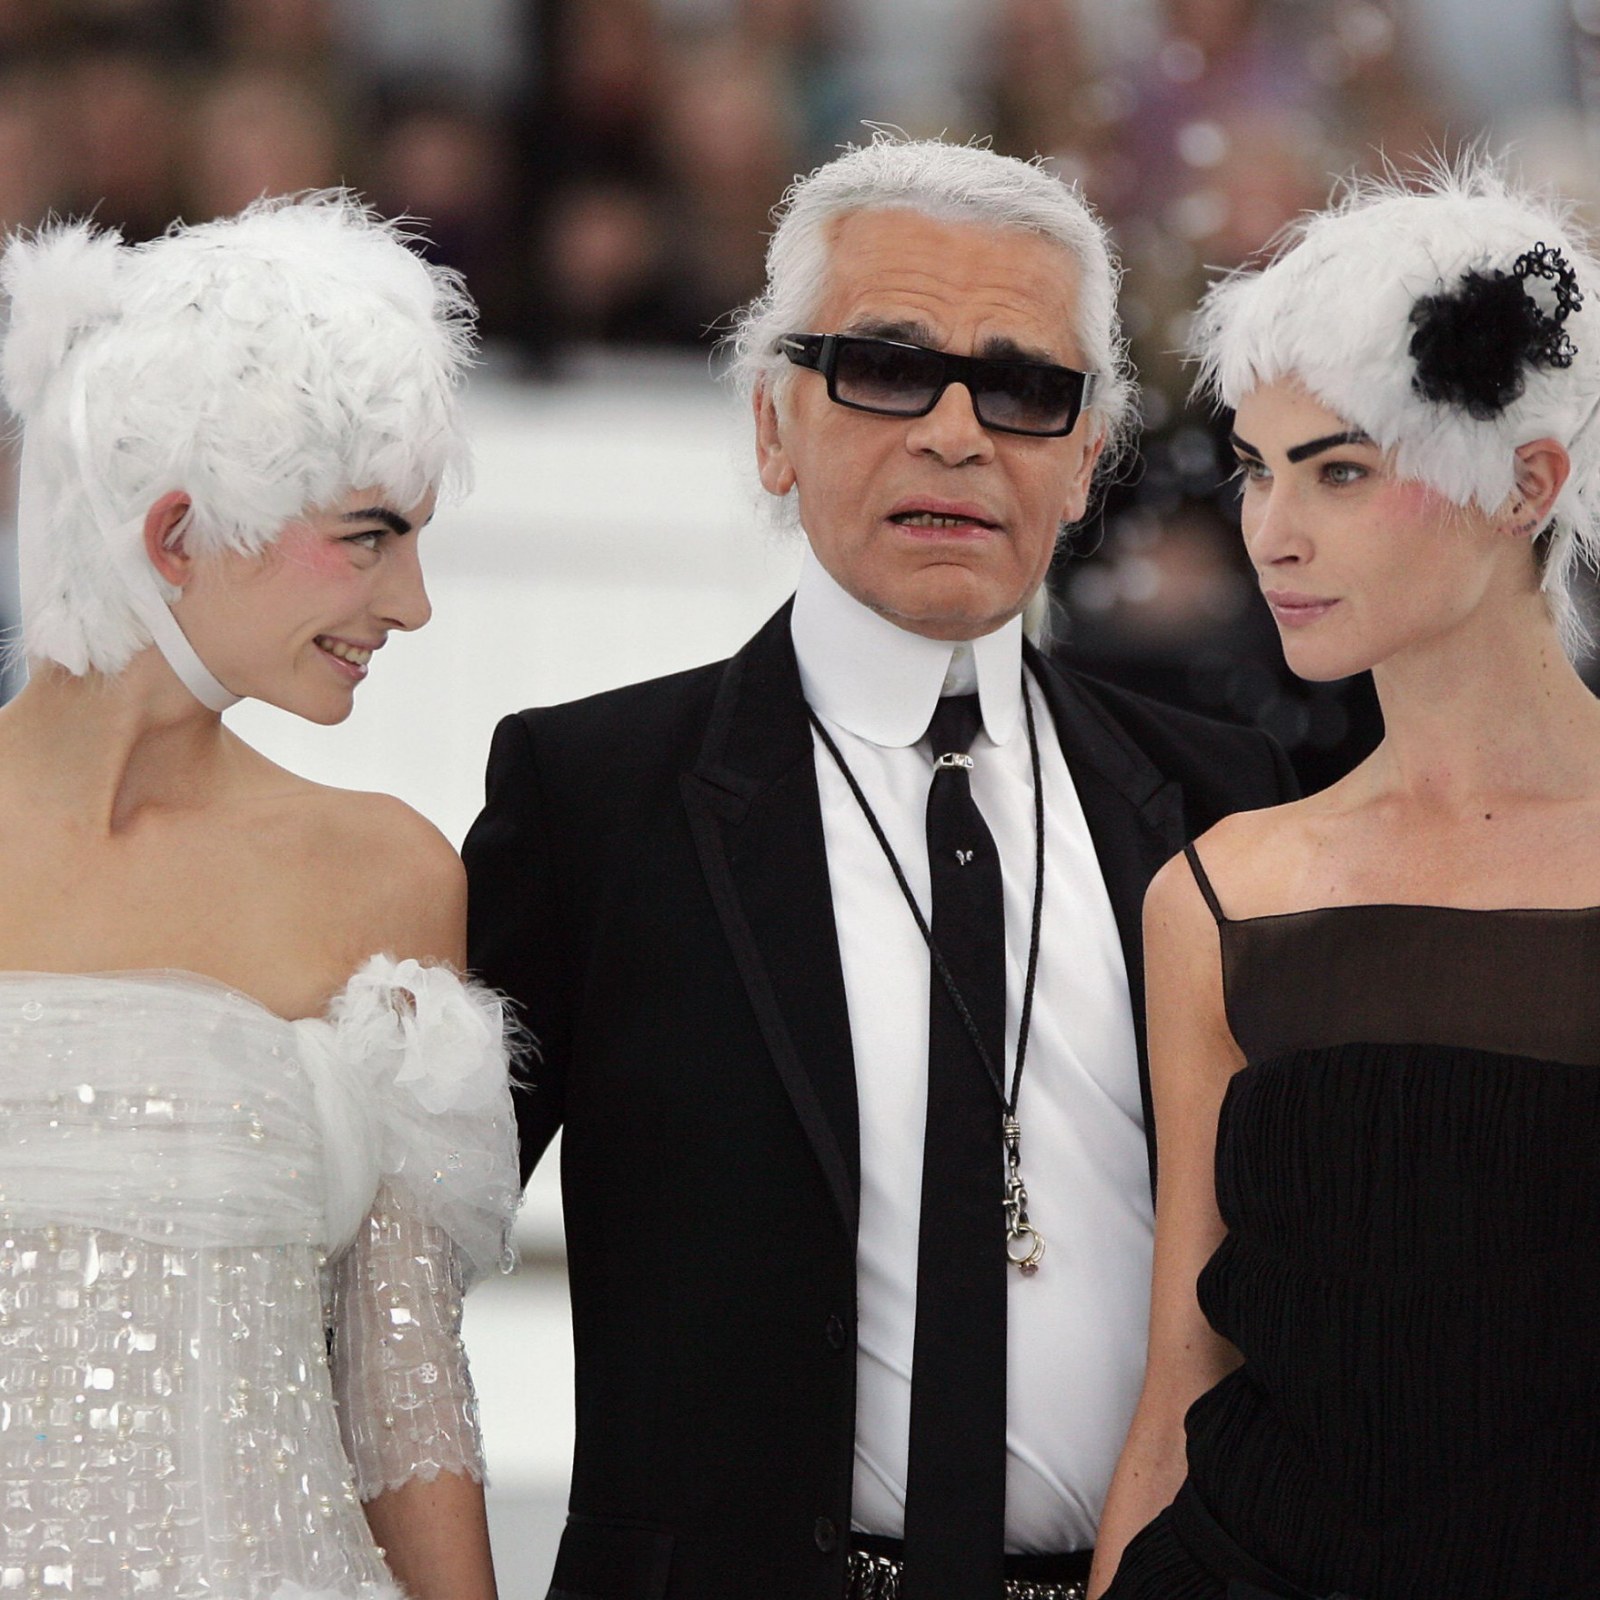 Karl Lagerfeld's Fashion Legacy: Designer's Greatest Creations in Pictures